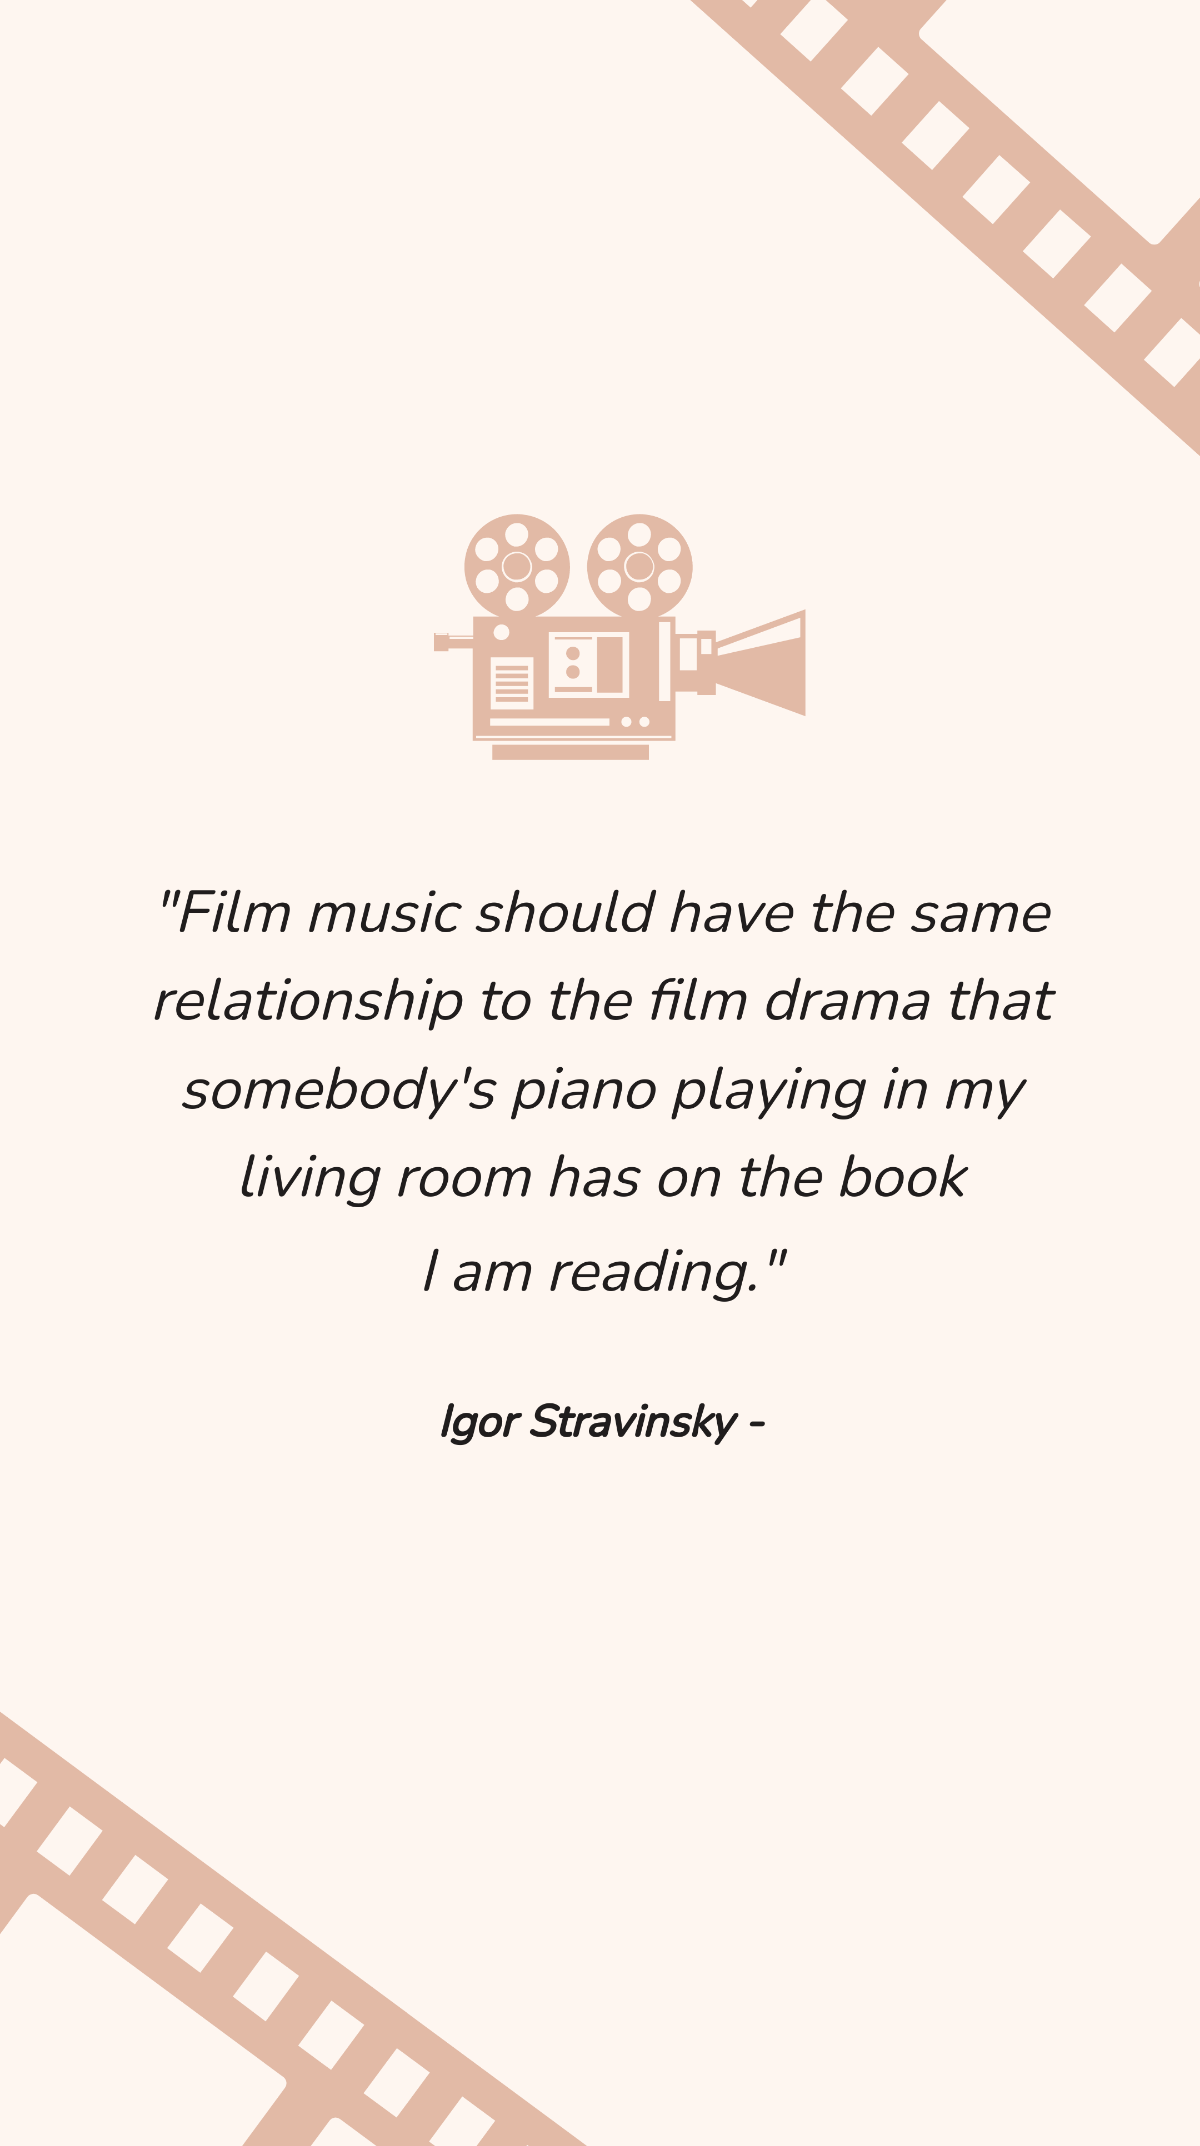 Igor Stravinsky - Film music should have the same relationship to the film drama that somebody's piano playing in my living room has on the book I am reading. Template